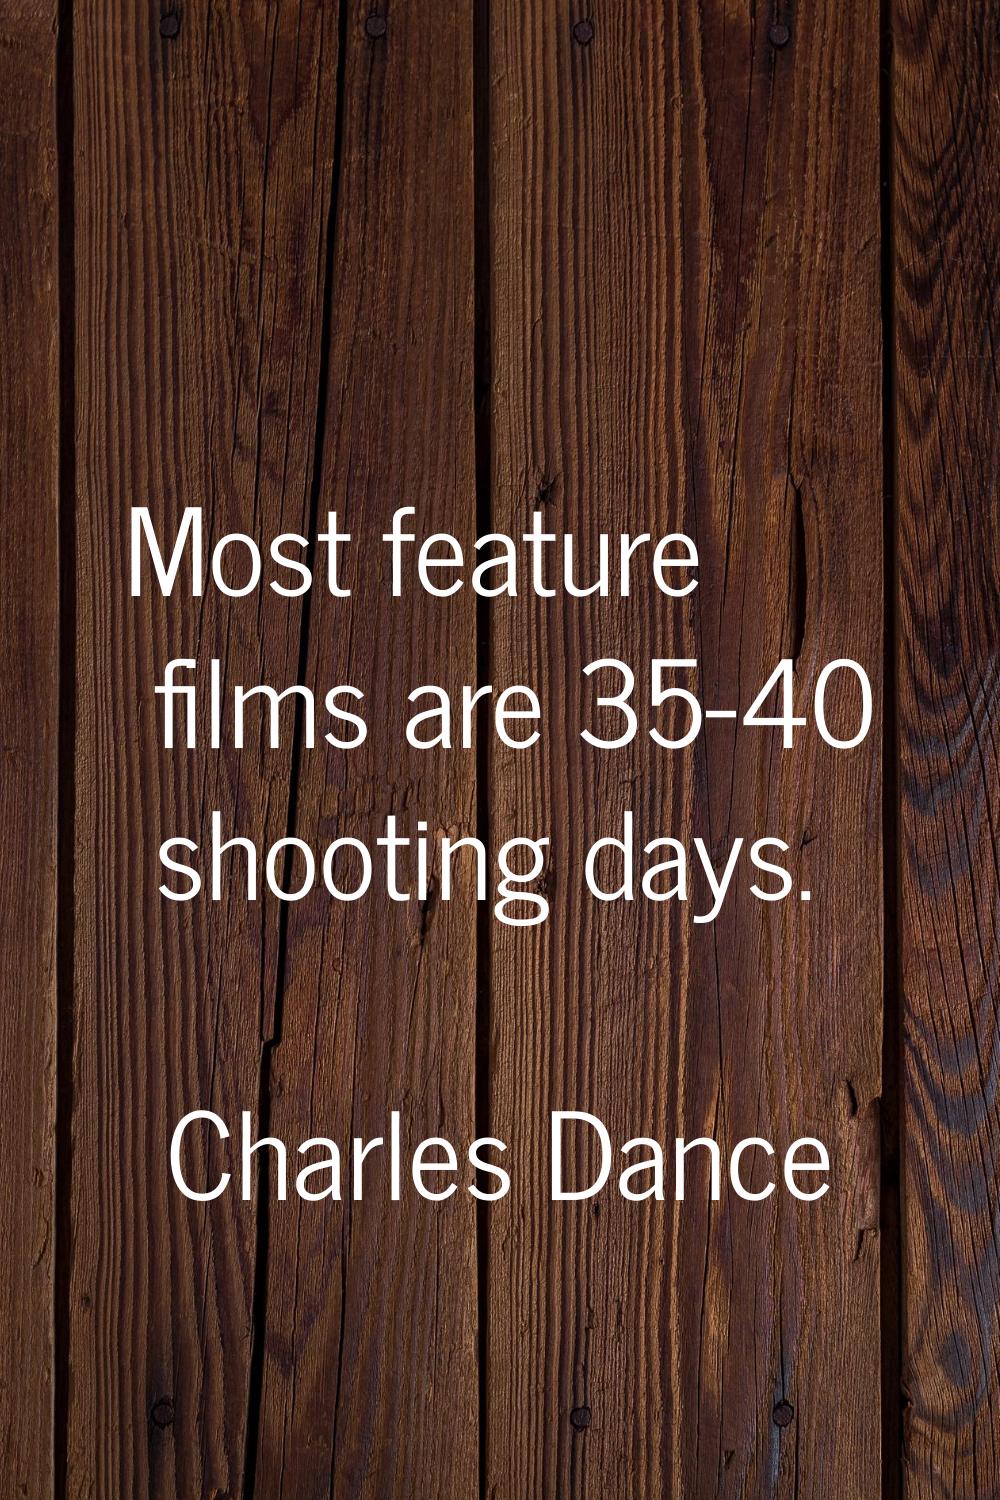 Most feature films are 35-40 shooting days.